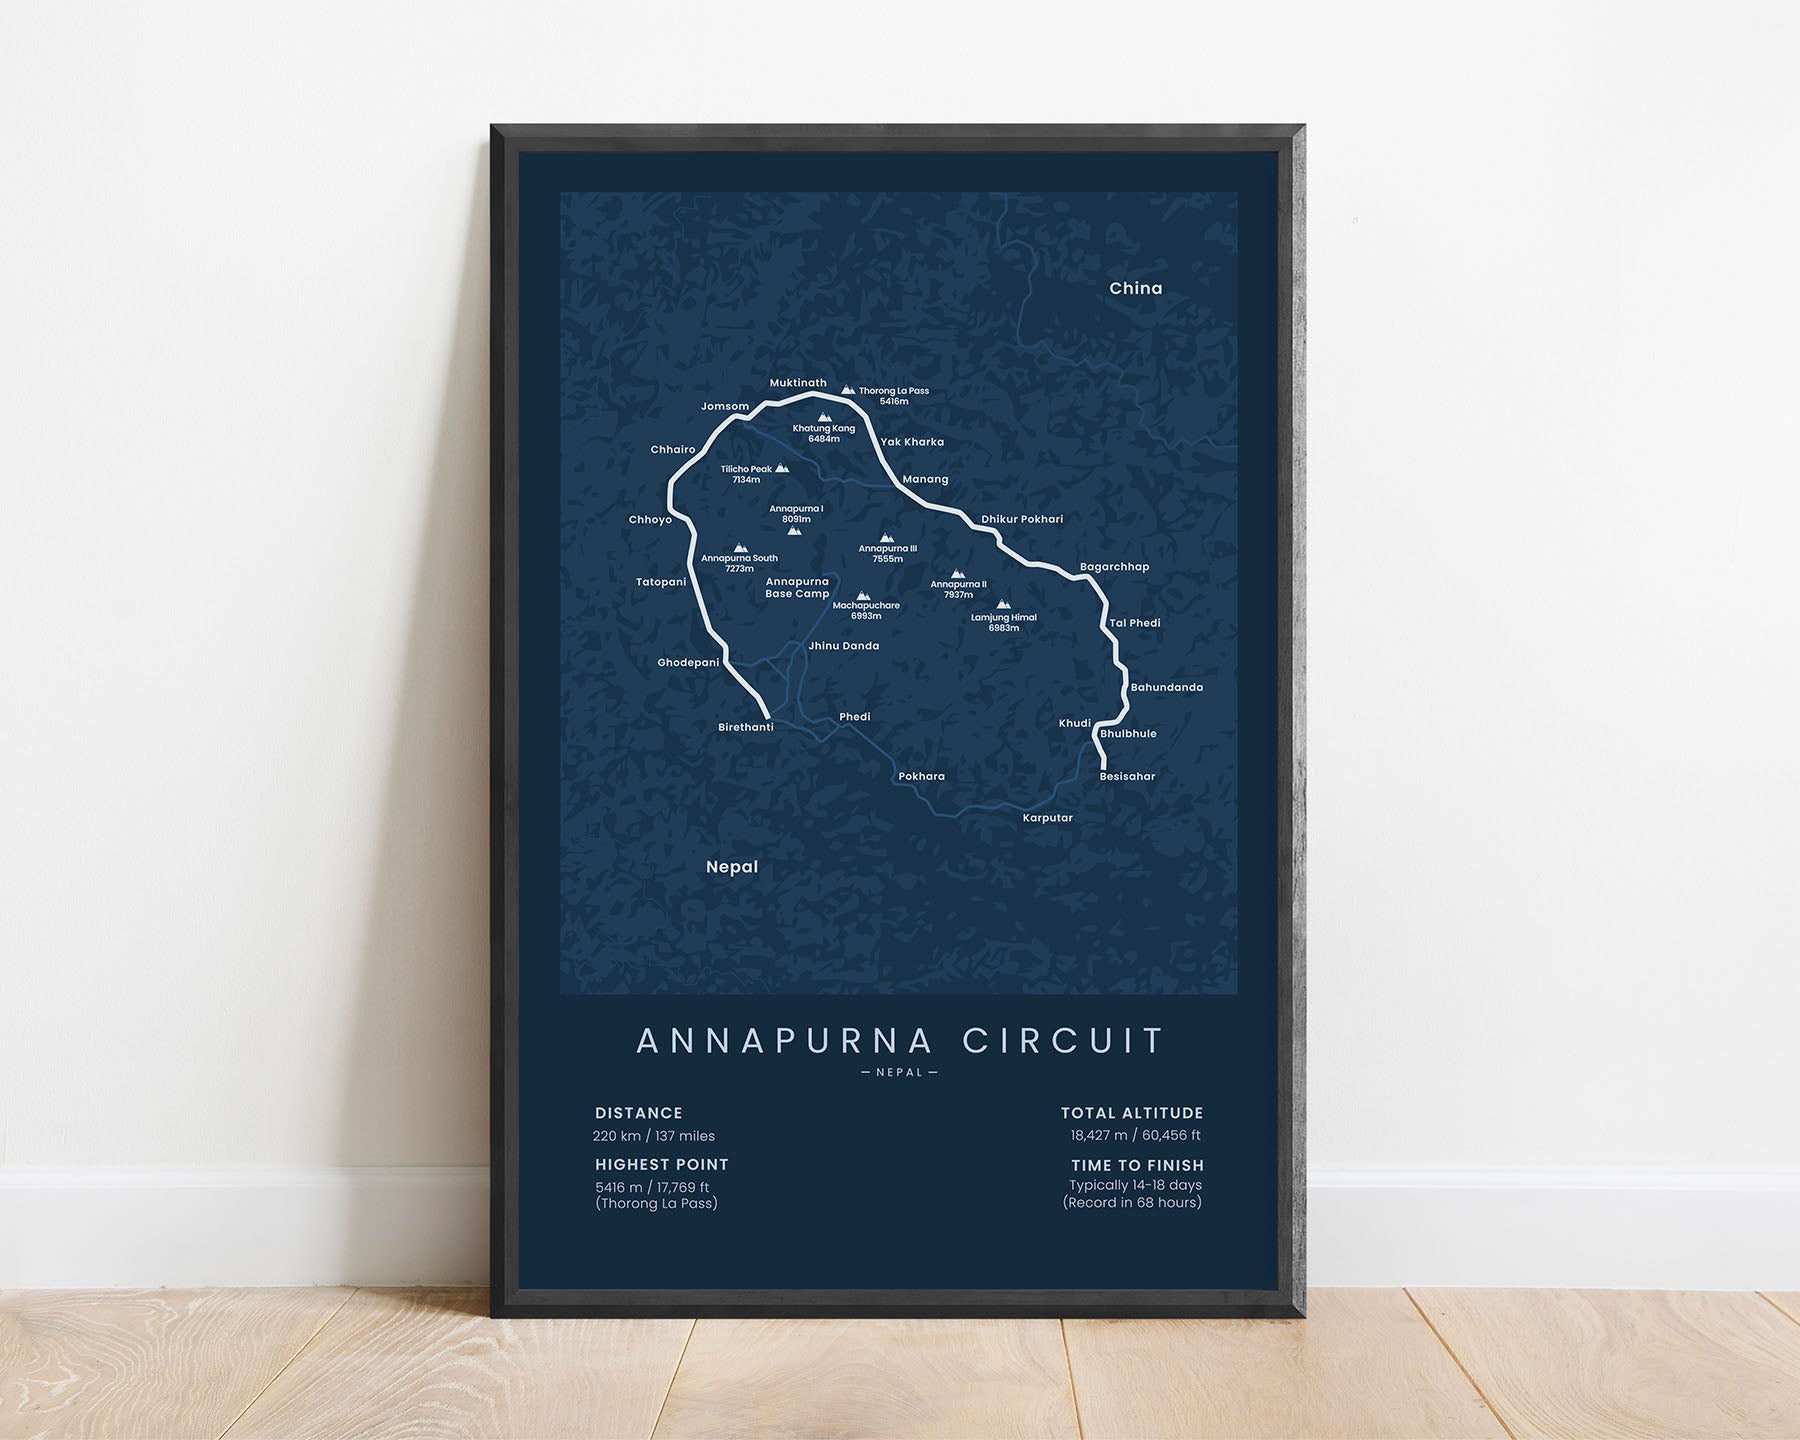 Annapurna Circuit Trek (Himalayas) route map art with blue background